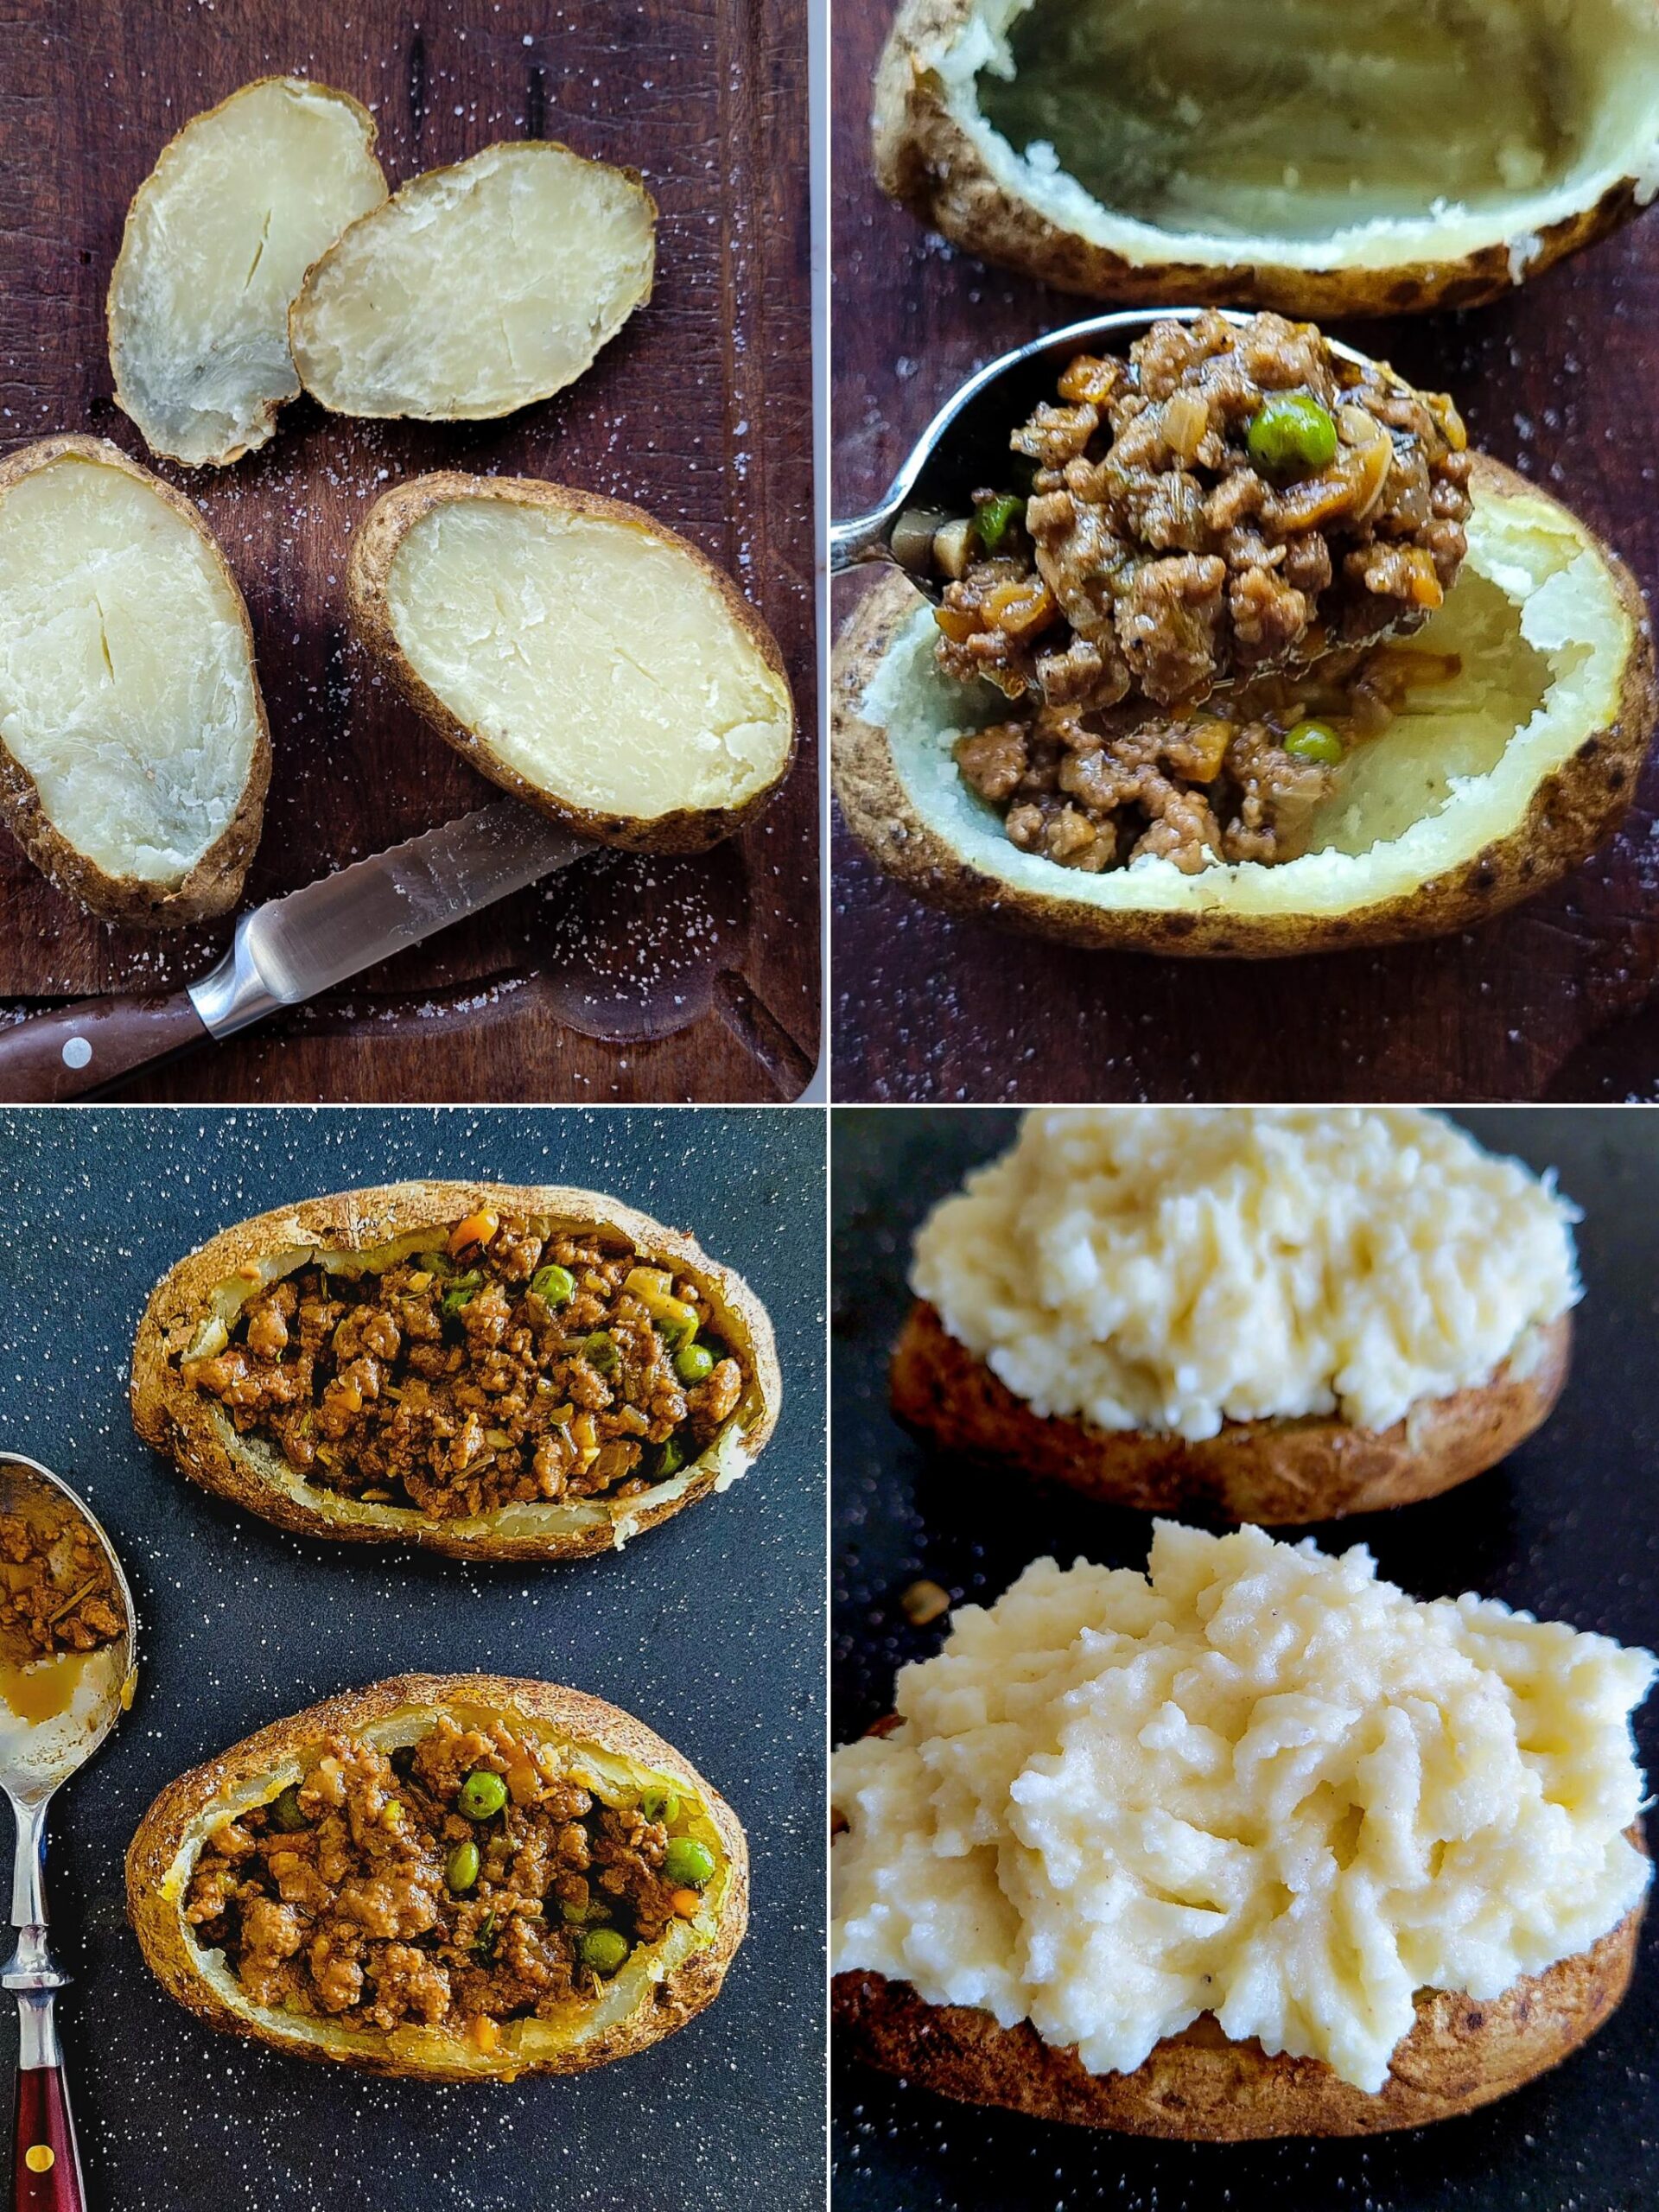 Collage showing the assembling of Shepherd's Pie Stuffed Potatoes